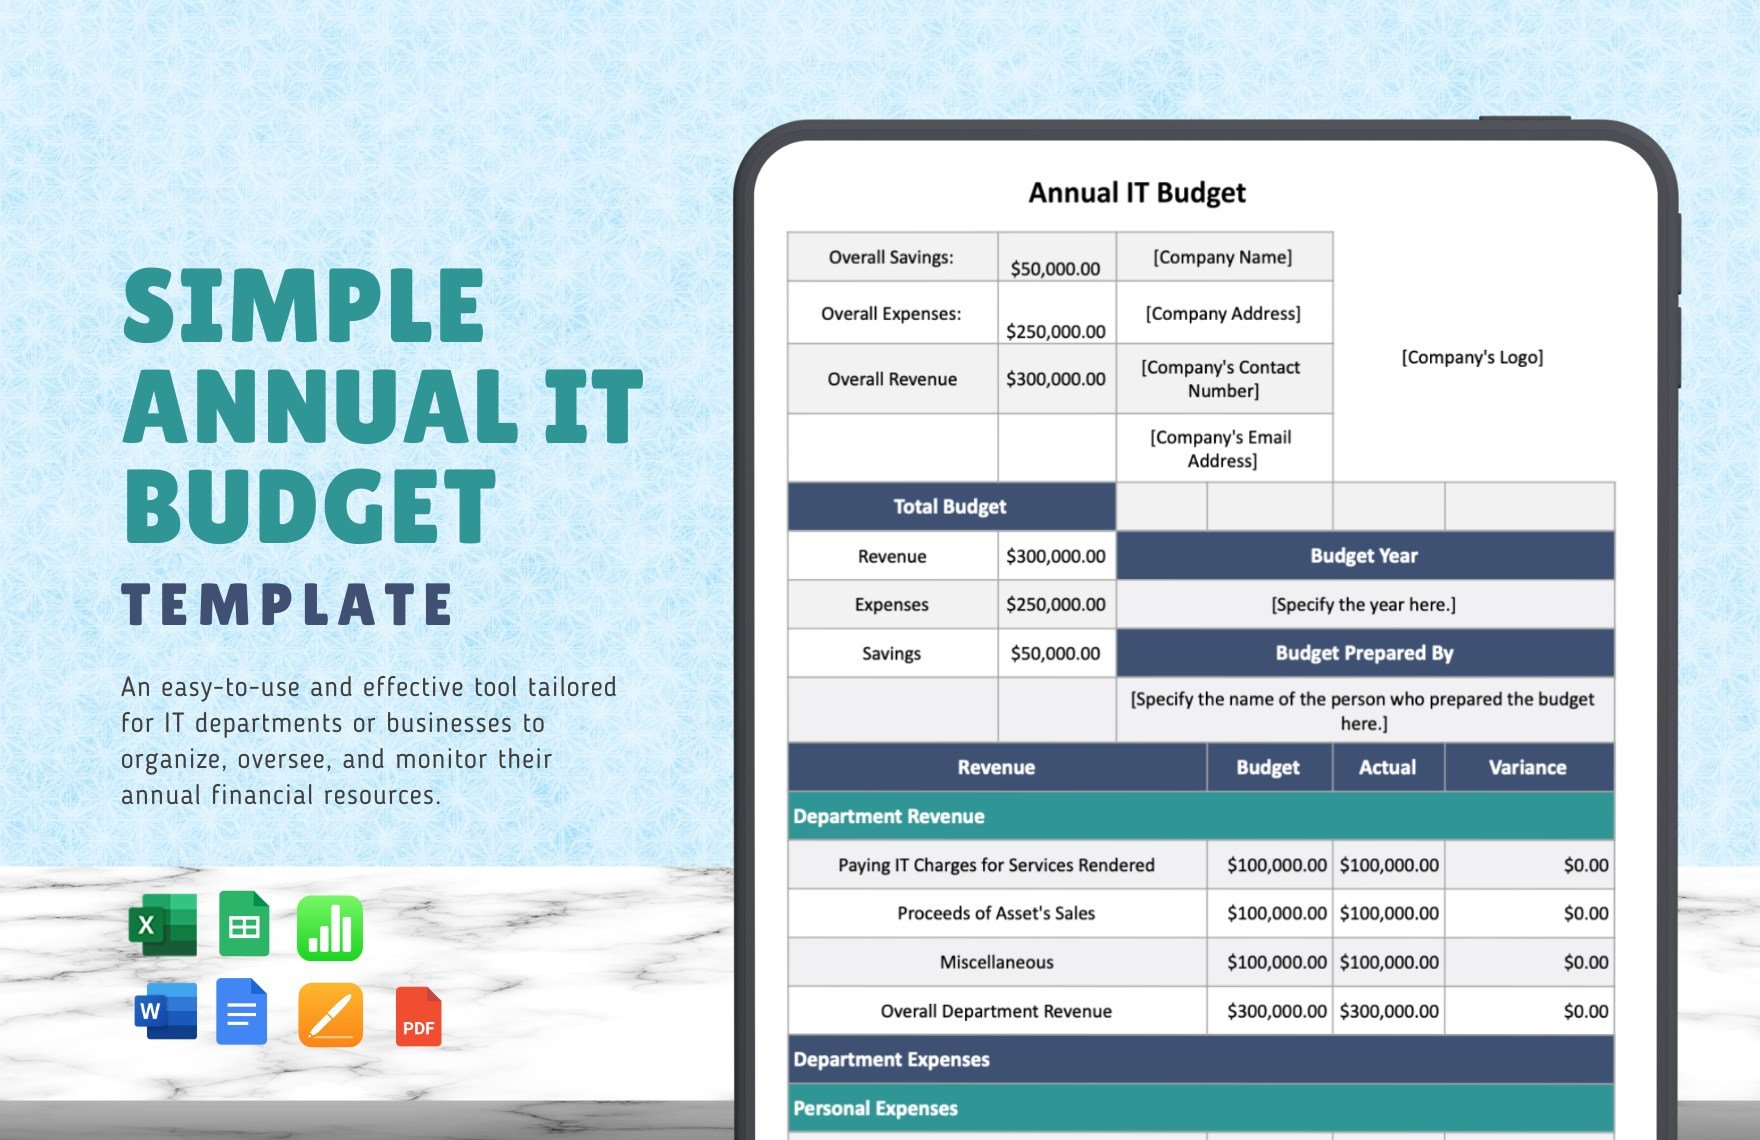 Simple Annual IT Budget Template in Word, Google Docs, Excel, Google Sheets, Apple Pages, Apple Numbers